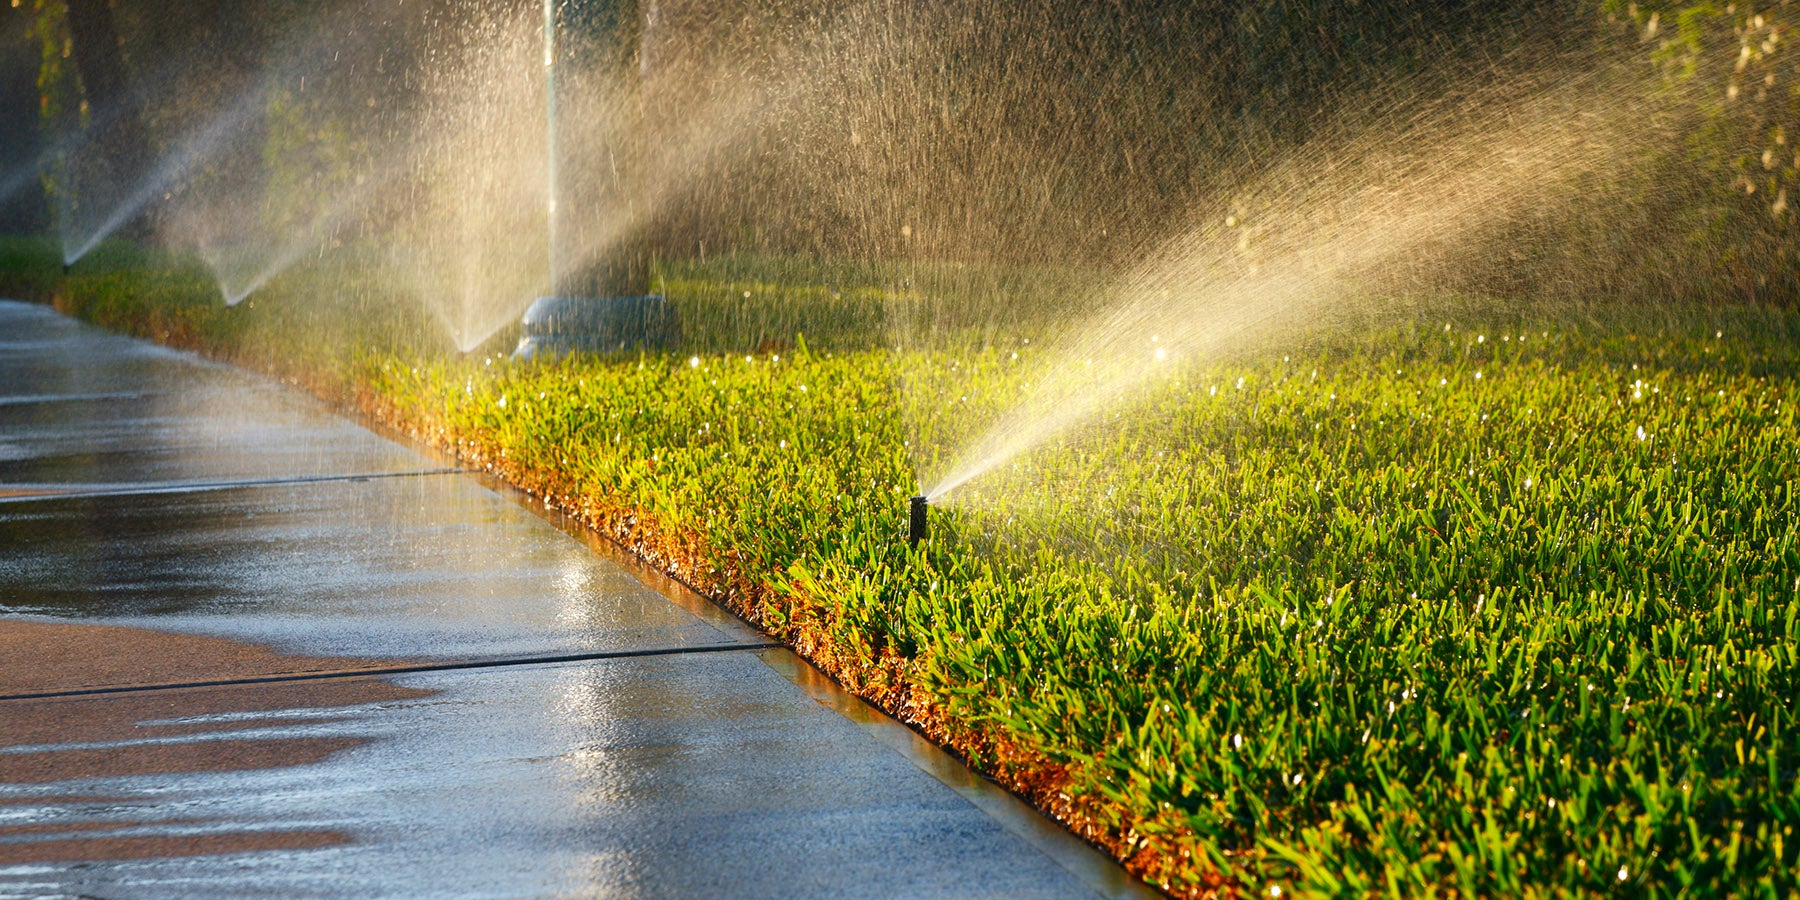 Avoid Overspraying and Overpaying for Water with These Lawn Irrigation Tips